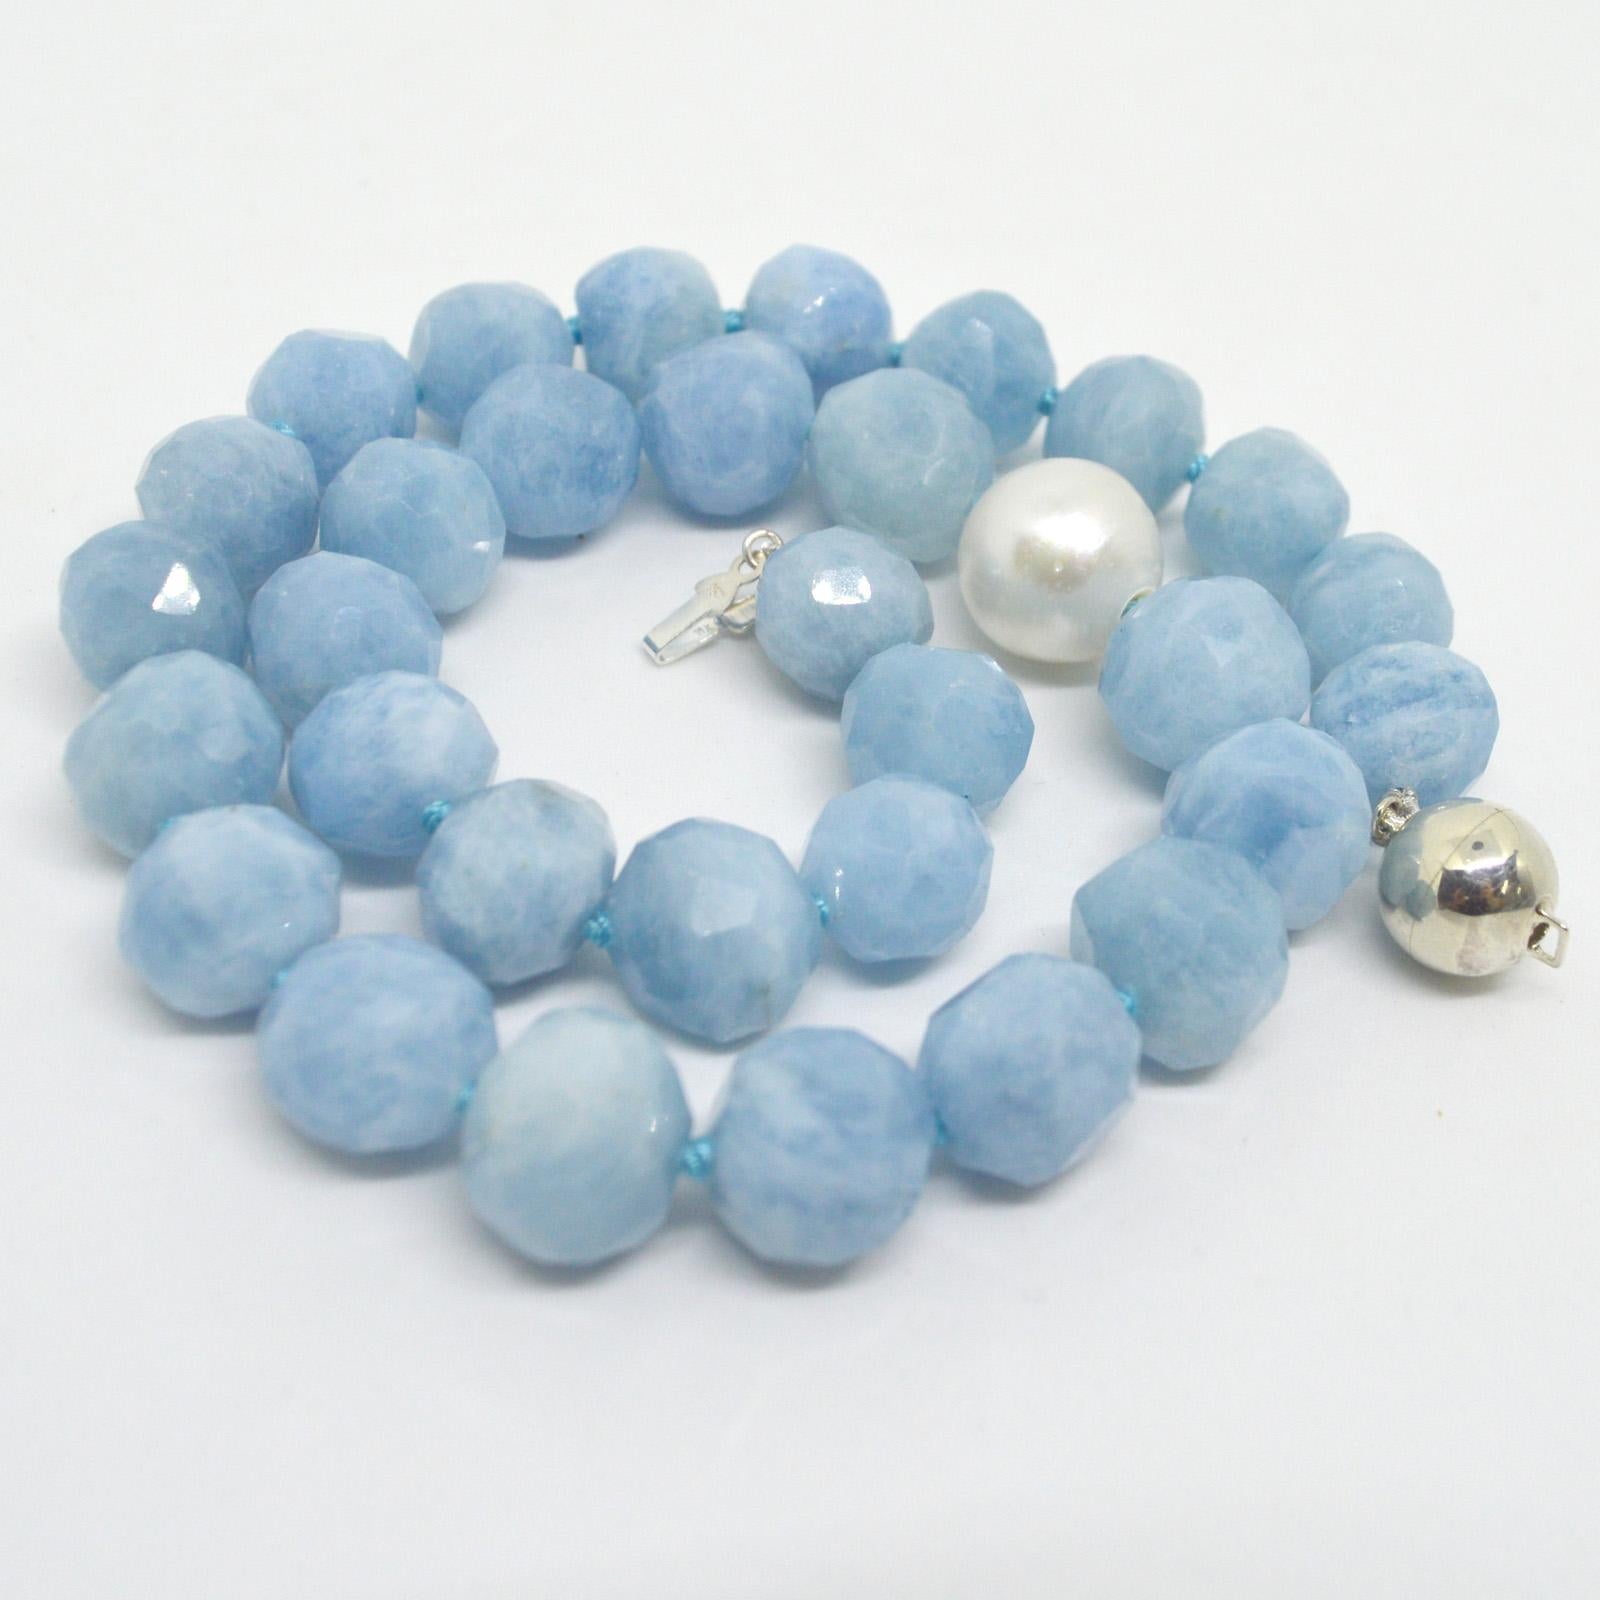 Aquamarine faceted Faceted round nuggets approximately 15mm wide with an off centre Australian South Sea pearl 15mm.
Hand knotted on matching aqua thread with a 12mm sterling silver clasp.
Finished necklace measures 45cm 